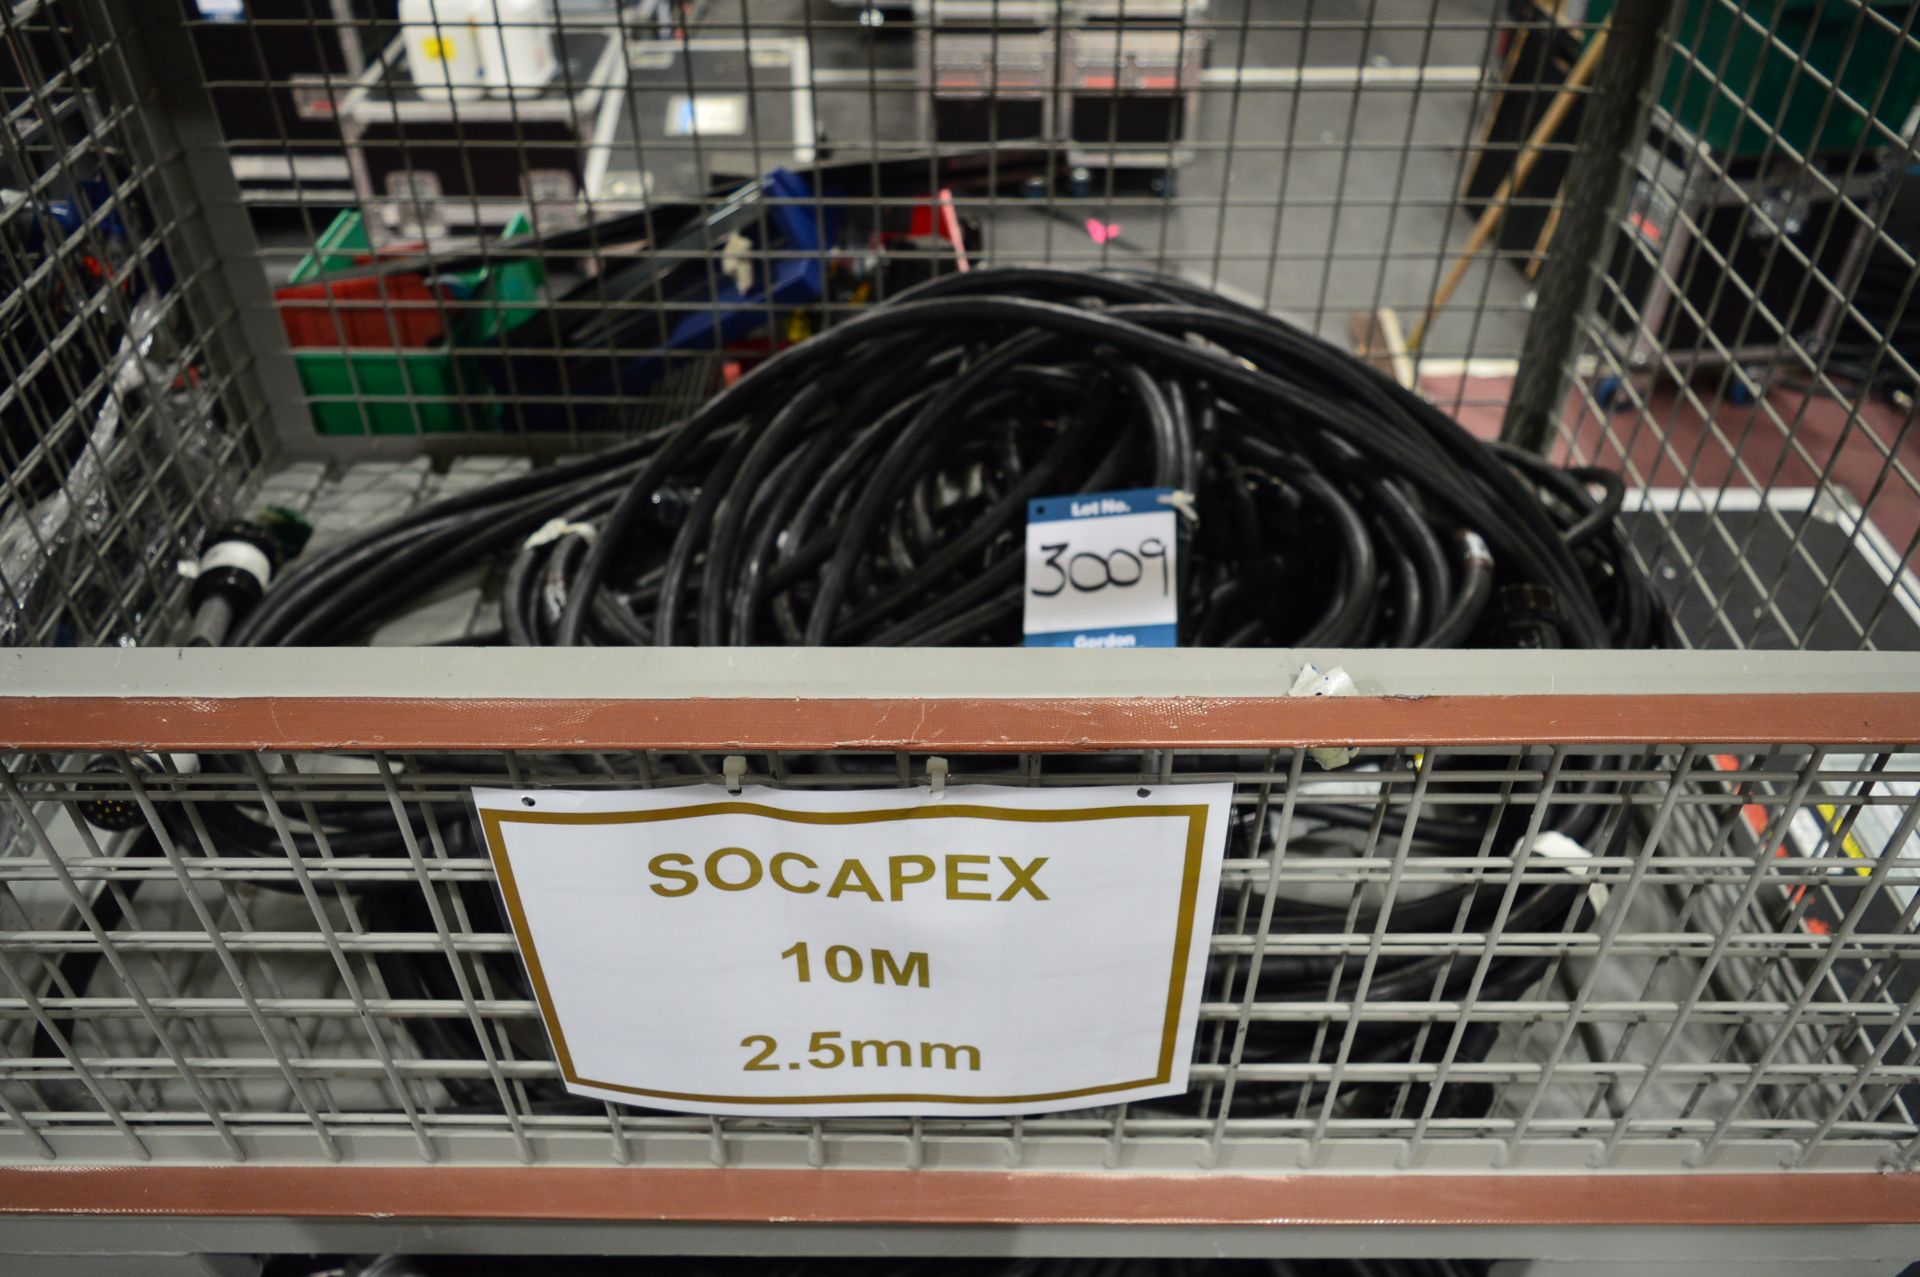 Quantity of 10m / 2.5mm Socapex cables (stillage not included): Unit 500, Eckersall Road, Birmingham